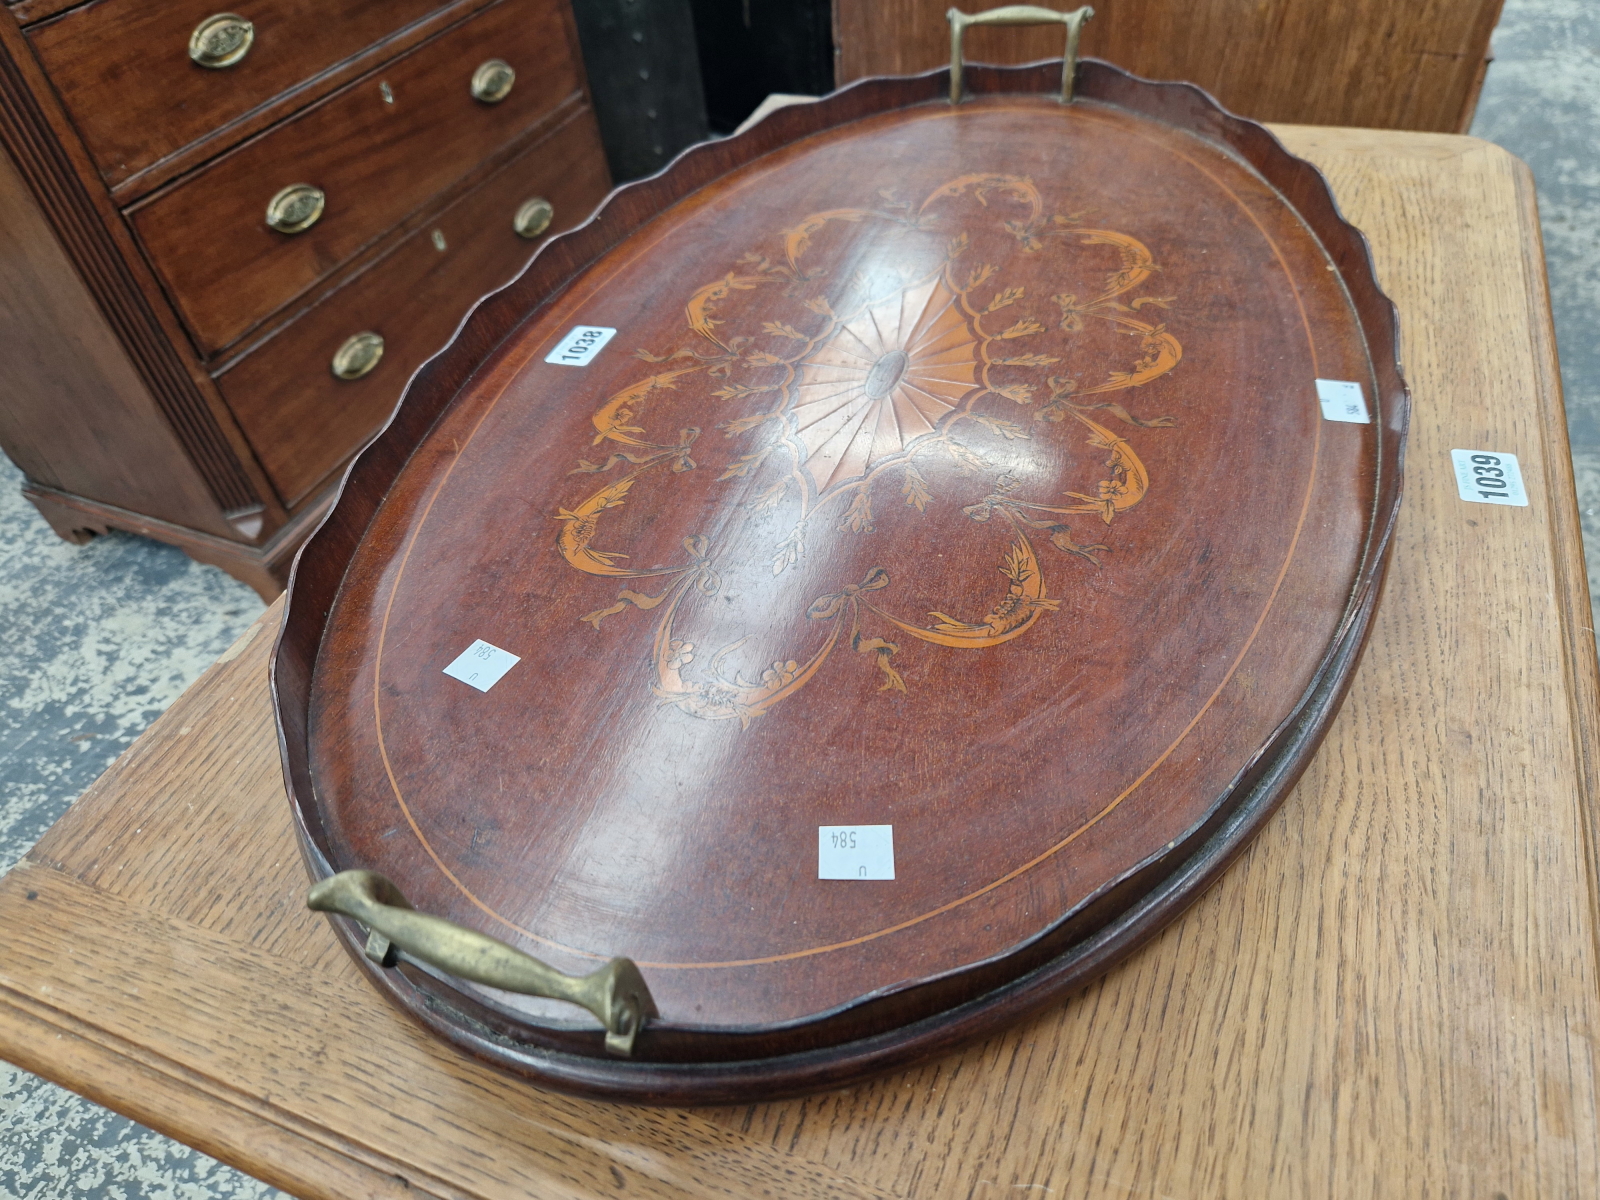 A BRASS HANDLED MAHOGANY OVAL TRAY INLAID WITH A CENTRAL PATERA WITHIN DRAPERY SWAGS - Image 2 of 2